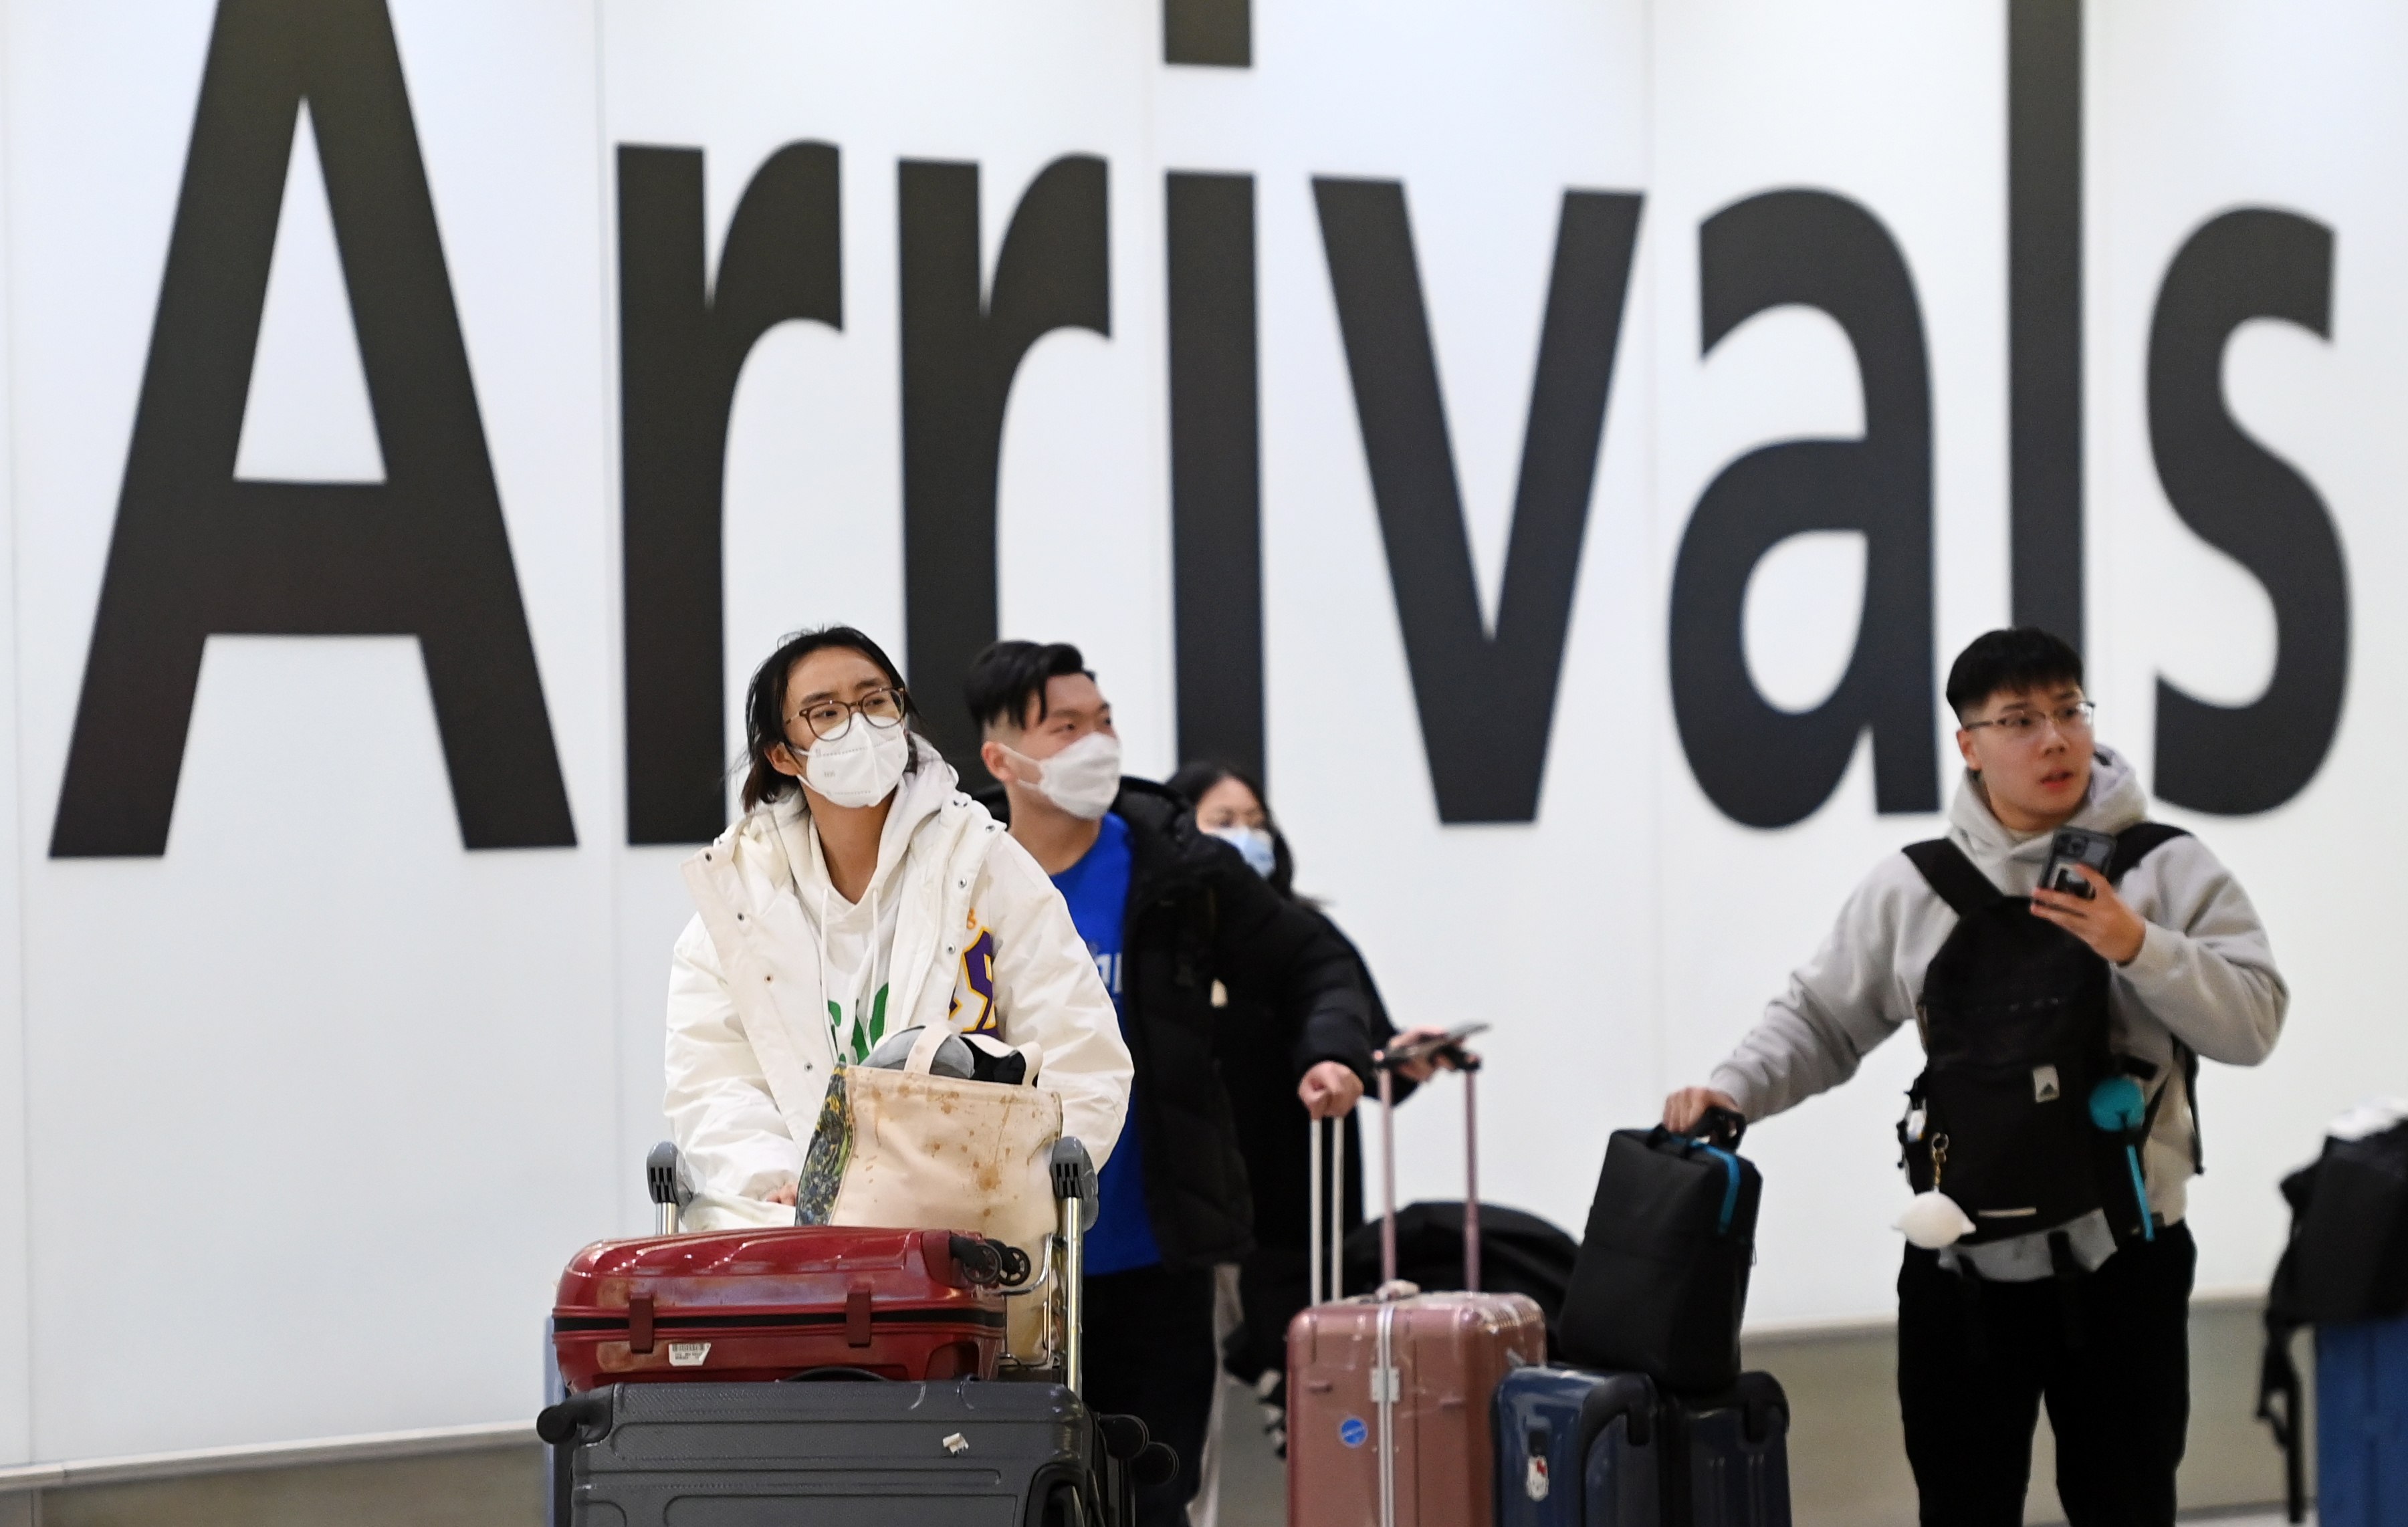 People traveling from China arrive at London’s Heathrow Airport in January. EPA-EFE